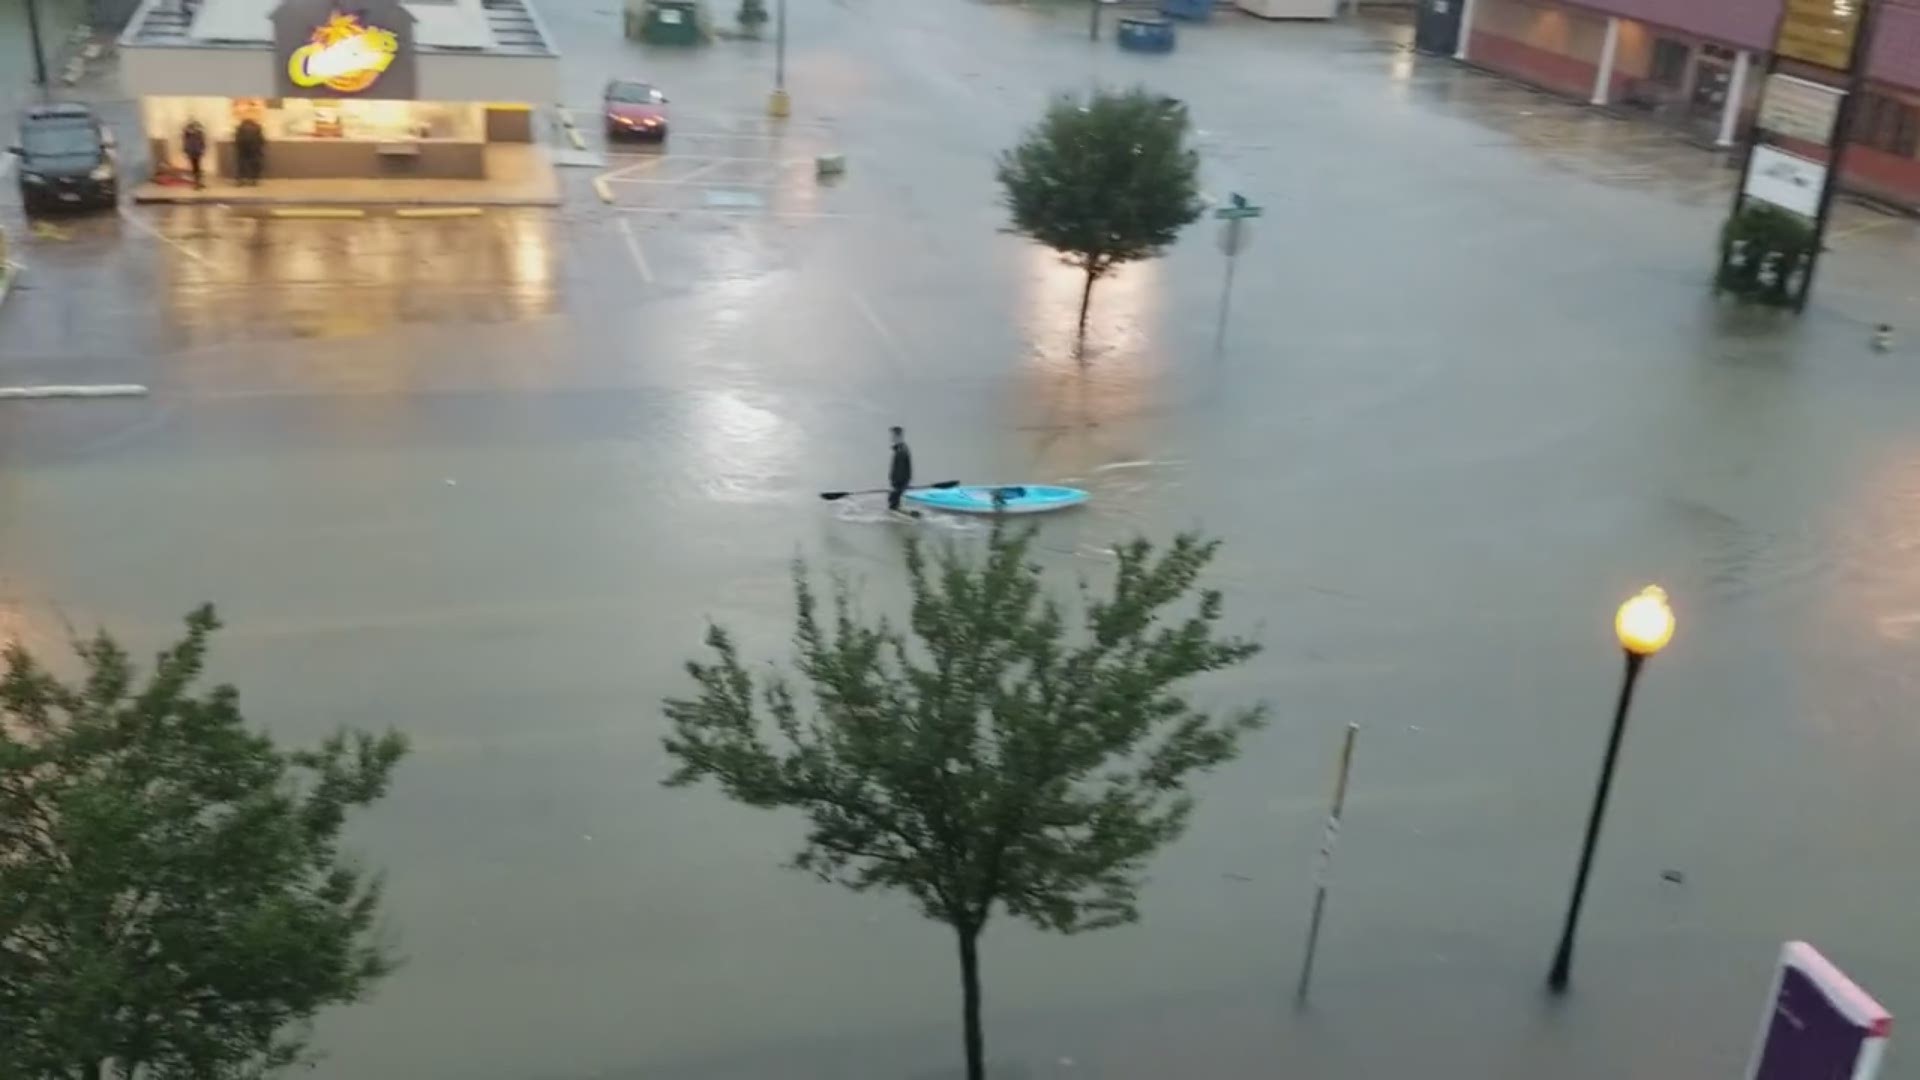 Meteorologist Jeff Gerber catches a man hauling a kayak through flooded streets in Beaumont.